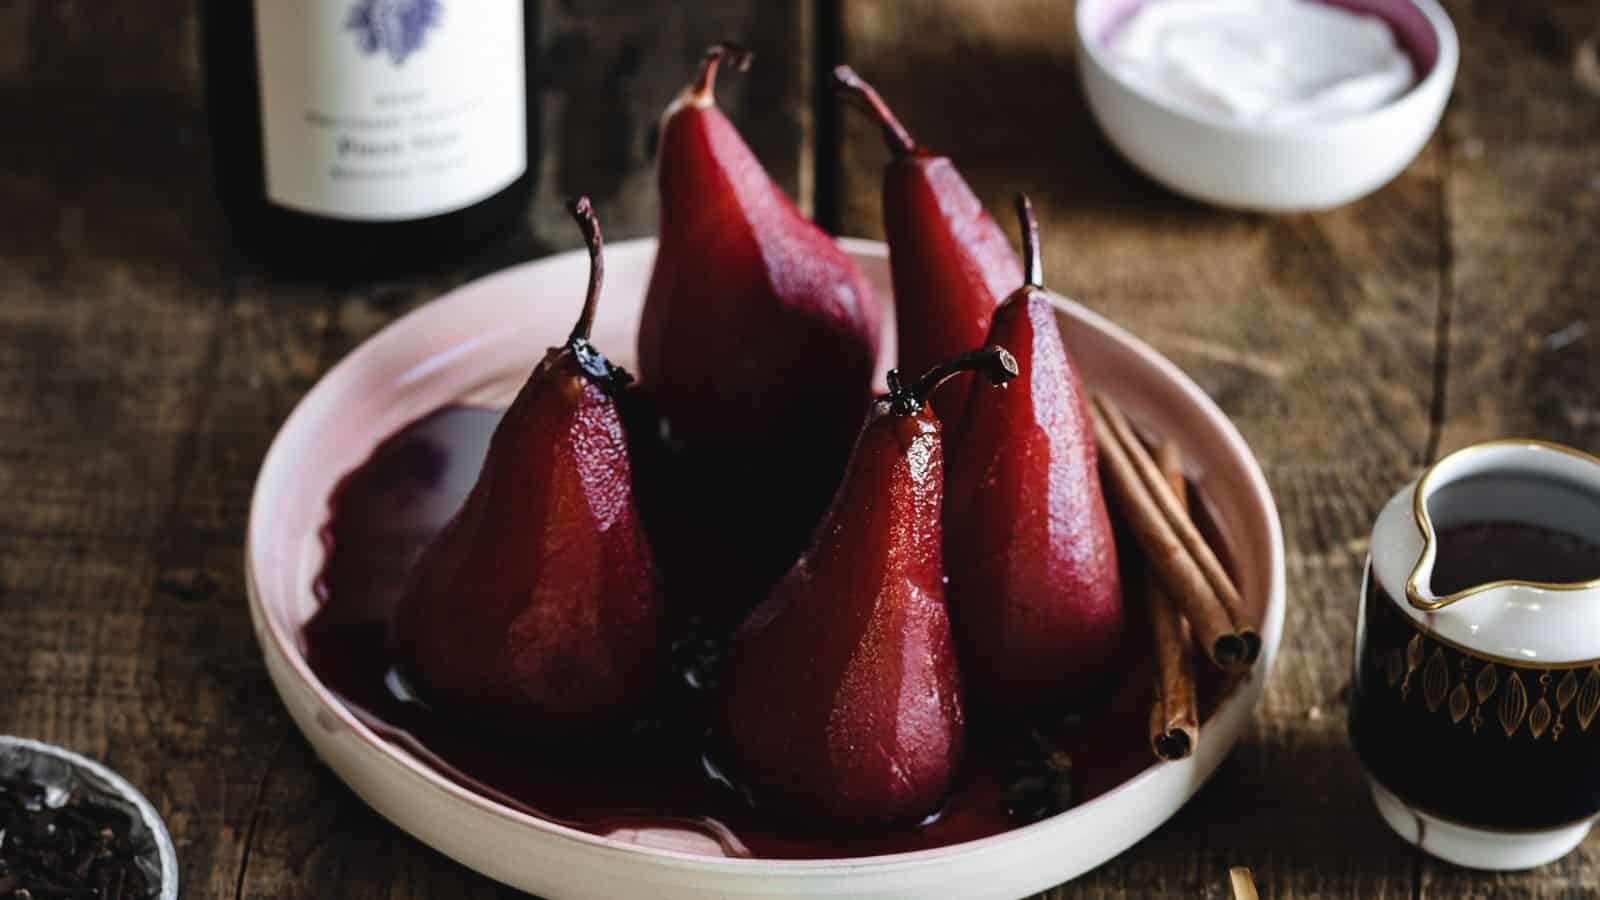 Poached pears on a pink plate with cinnamon sticks.